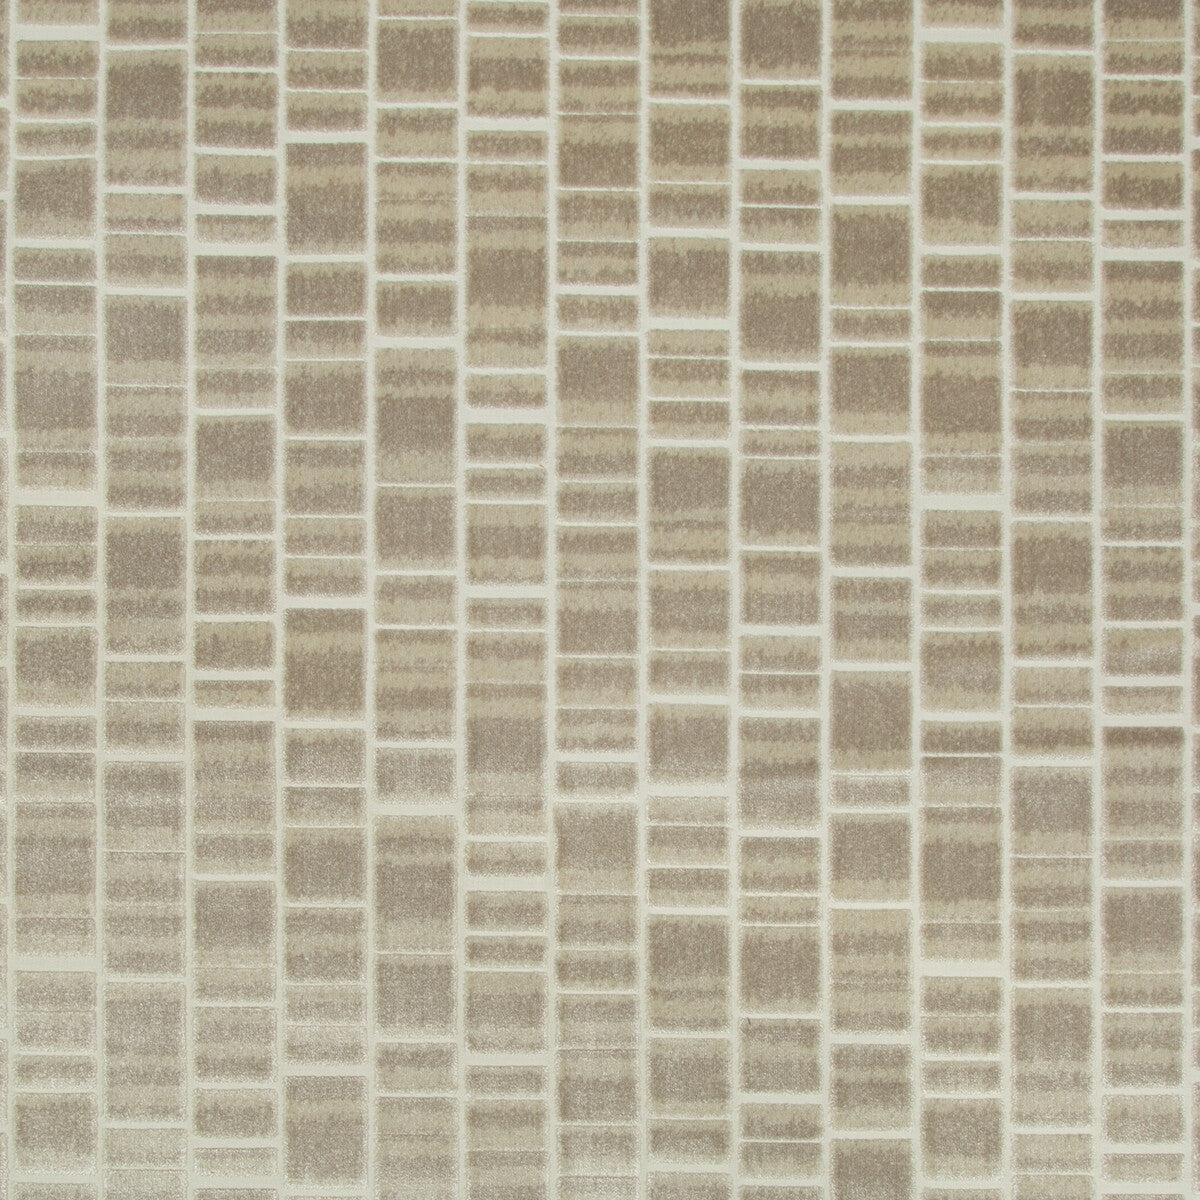 Caisson fabric in dove color - pattern 34847.16.0 - by Kravet Basics in the Thom Filicia Altitude collection